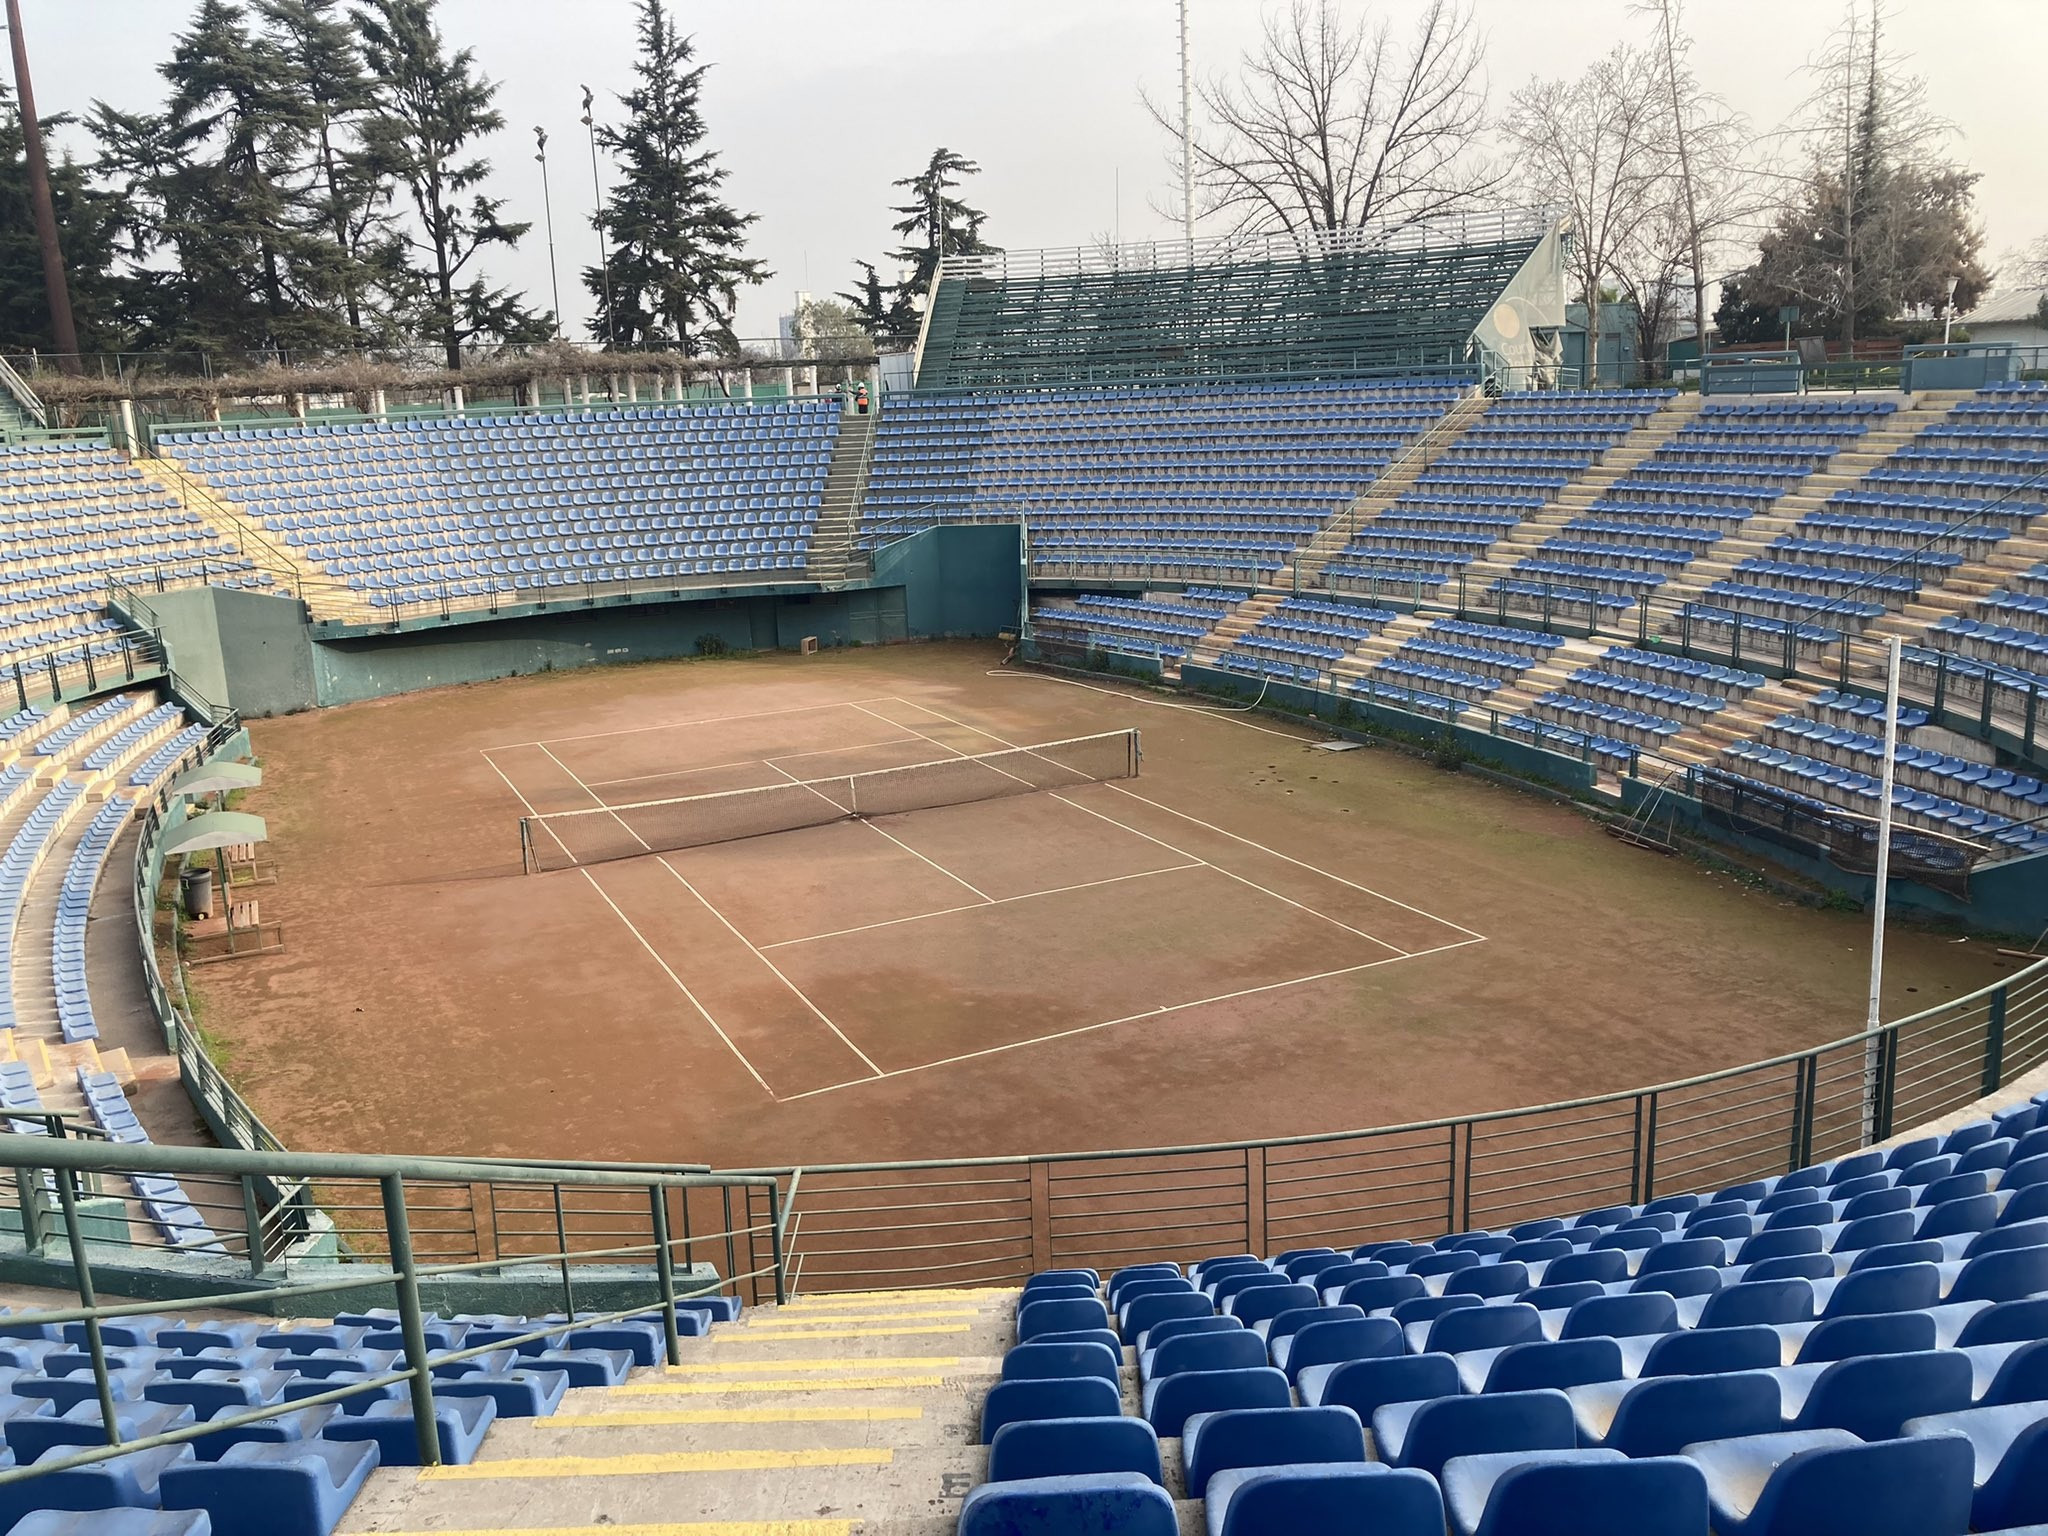 The Court Central Anita Lizana is one of several venues that are set to be refurbished ©ITG